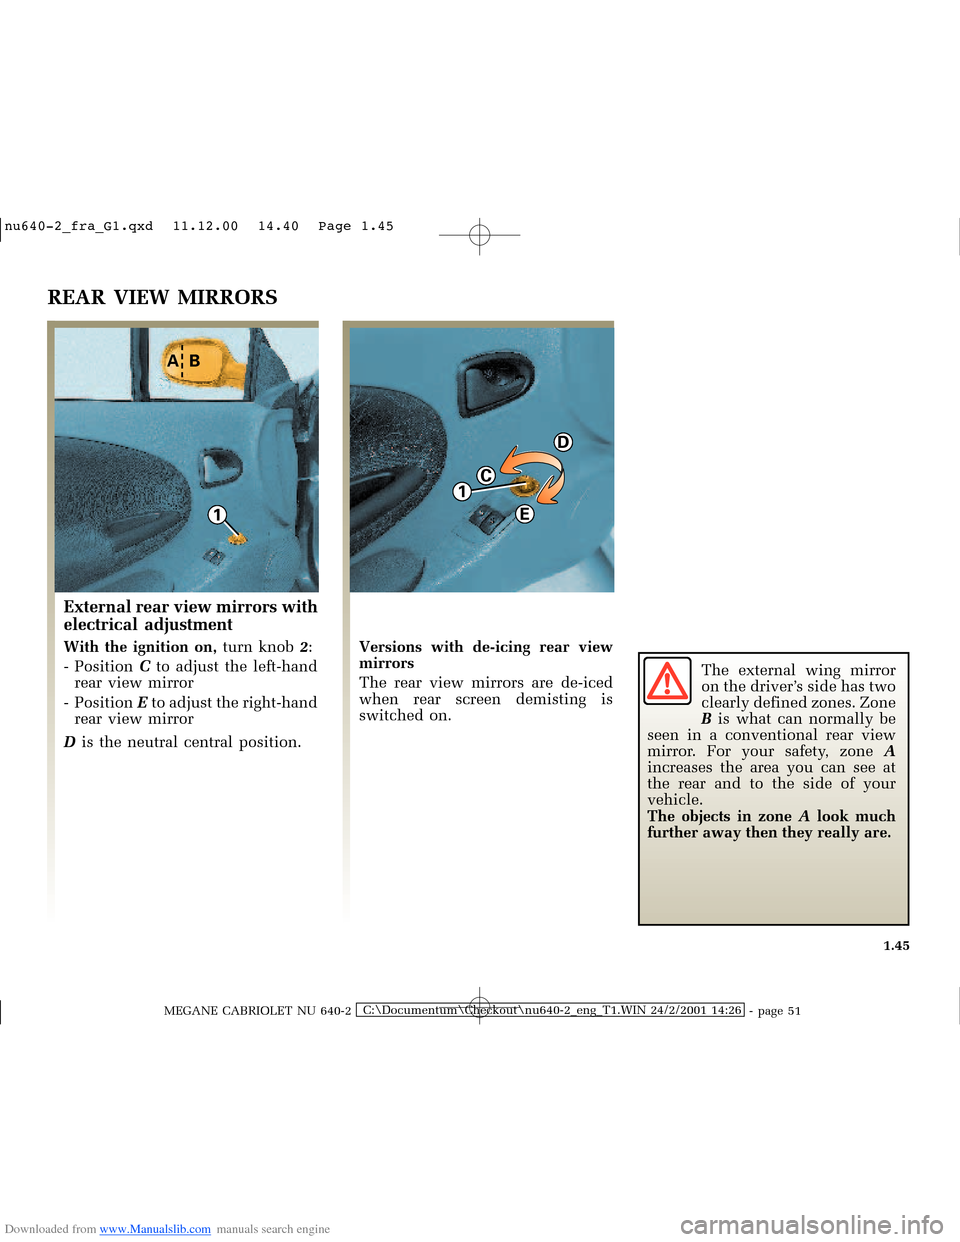 RENAULT MEGANE 2000 X64 / 1.G Owners Manual Downloaded from www.Manualslib.com manuals search engine 1 AB
C
D
E
1
�Q�X������B�I�U�D�B�*���T�[�G� � ��������� � ������ � �3�D�J�H� ����
MEGANE CABRIOLET NU 640-2C:\Do